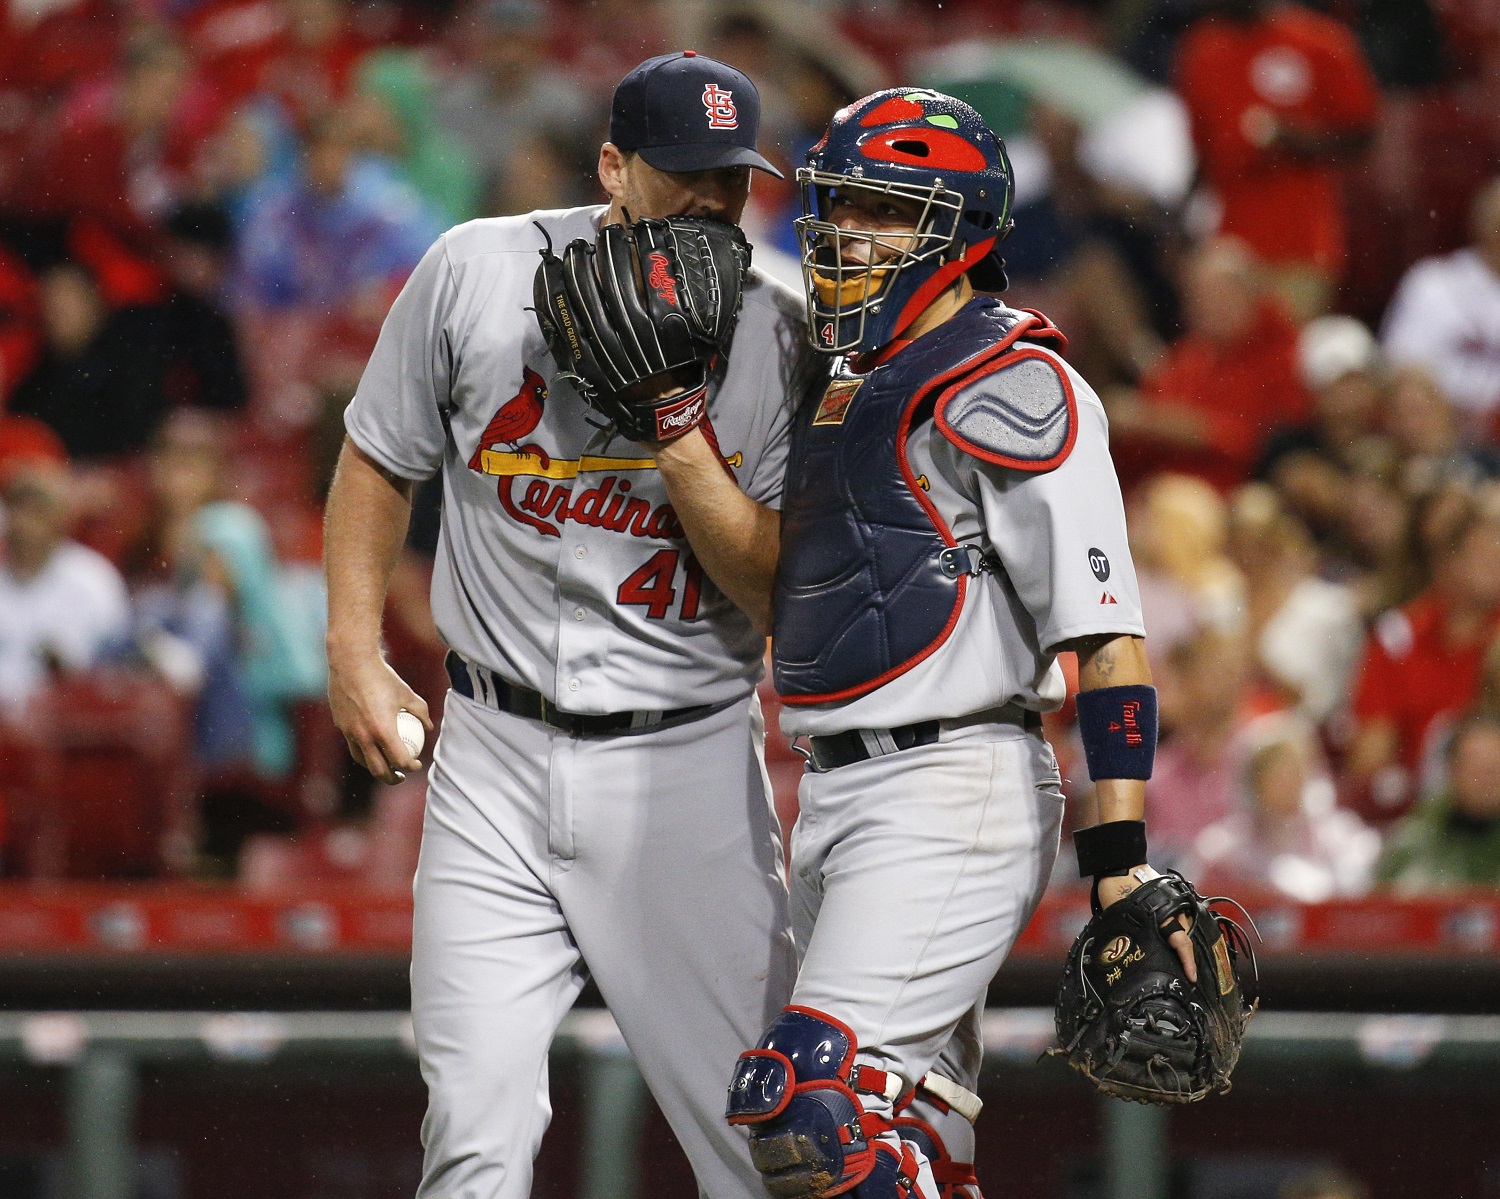 St. Louis Cardinals starting pitcher John Lackey (41) and catcher Yadier Molina (4) meet on the infield during the seventh inning of a baseball game, Friday, Sept. 11, 2015, in Cincinnati. (AP Photo/John Minchillo)